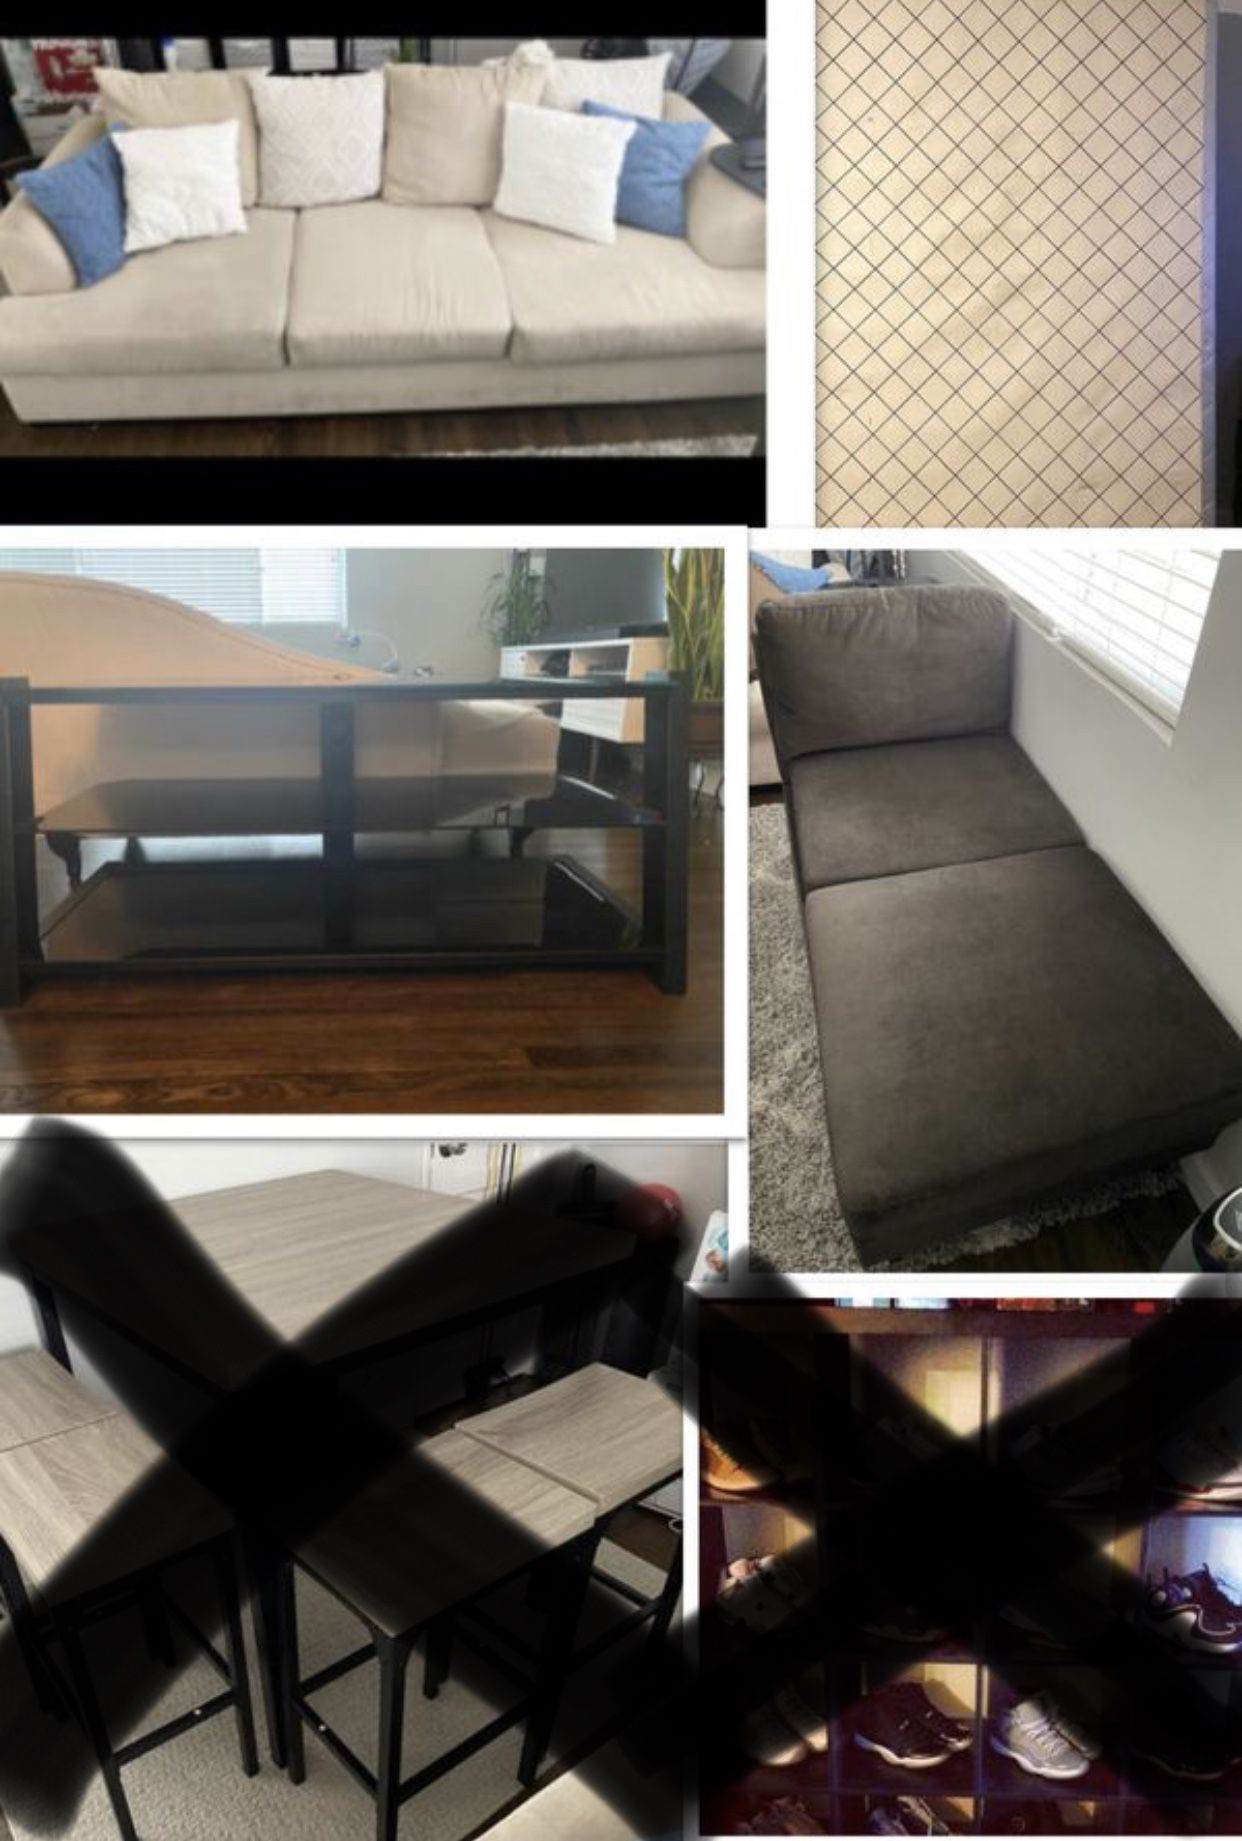 EVERYTHING MUST GO!!! Bundle deal: selling couch, chaise lounge chair, tv stand, Queen size box spring - $250 OBO